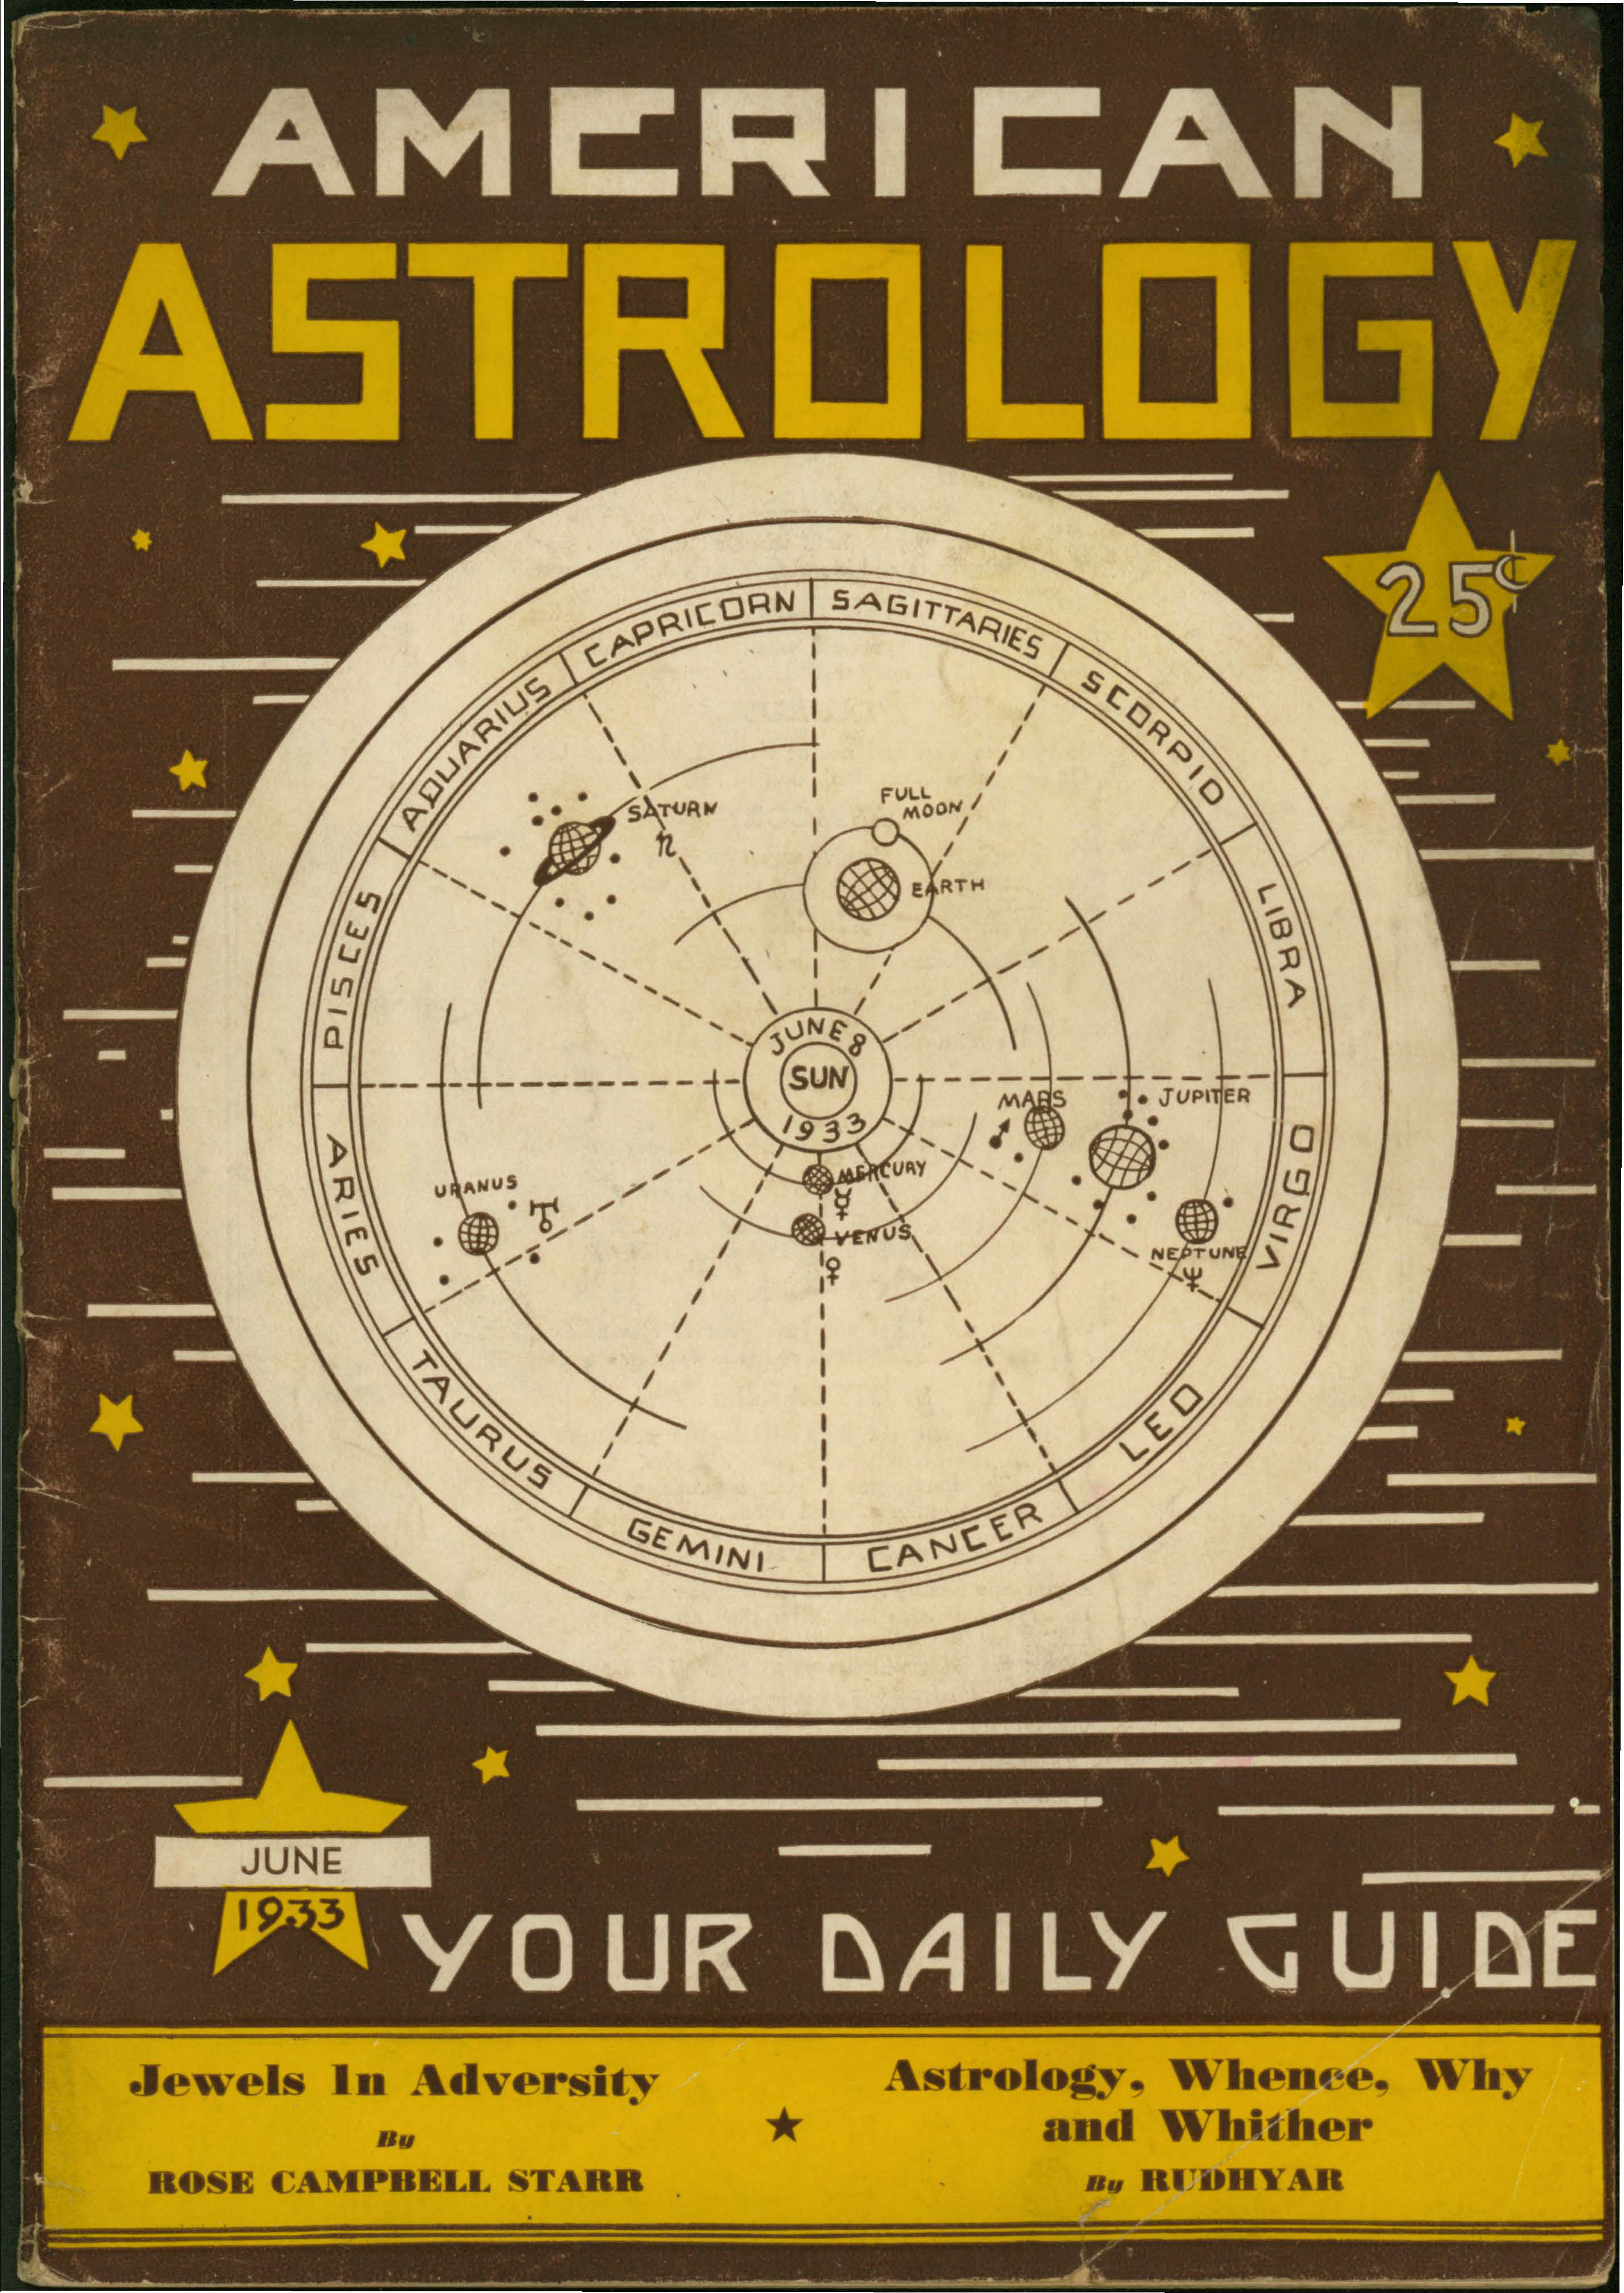 American Astrology 1933 covers_Page_2